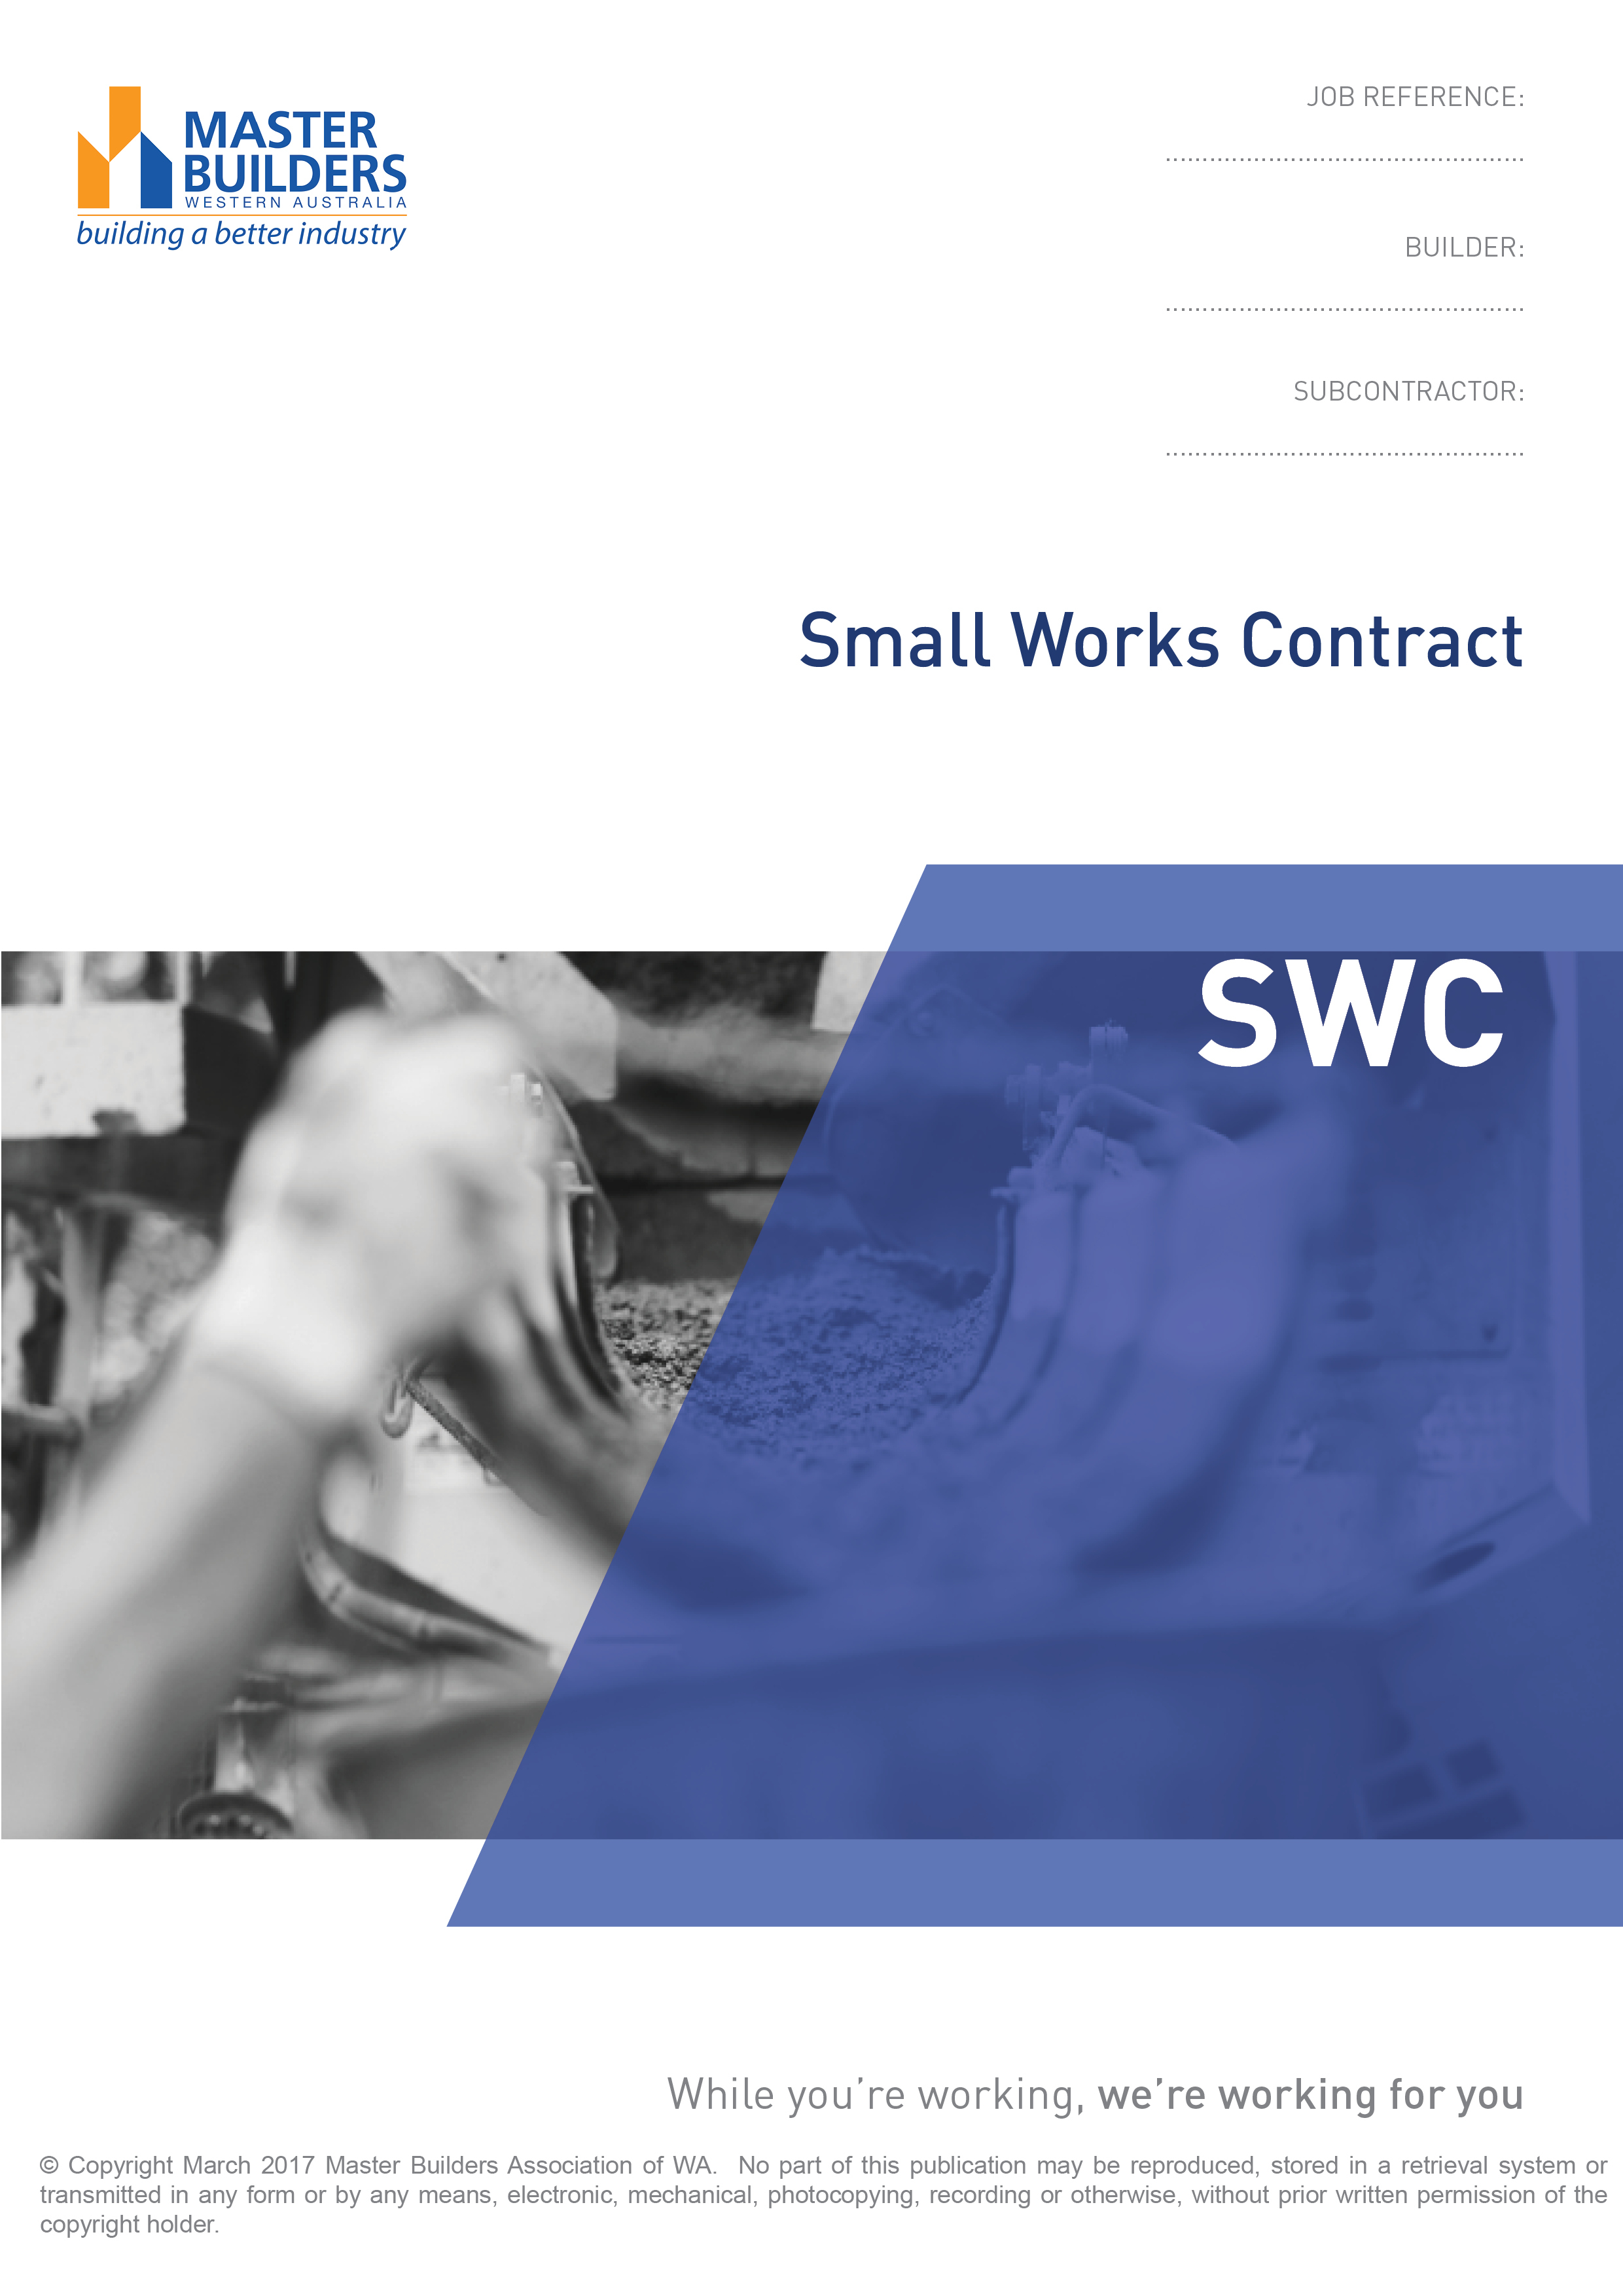 Minimum Purchase Agreement Small Works Contract Swc 2017 Minimum Purchase 2